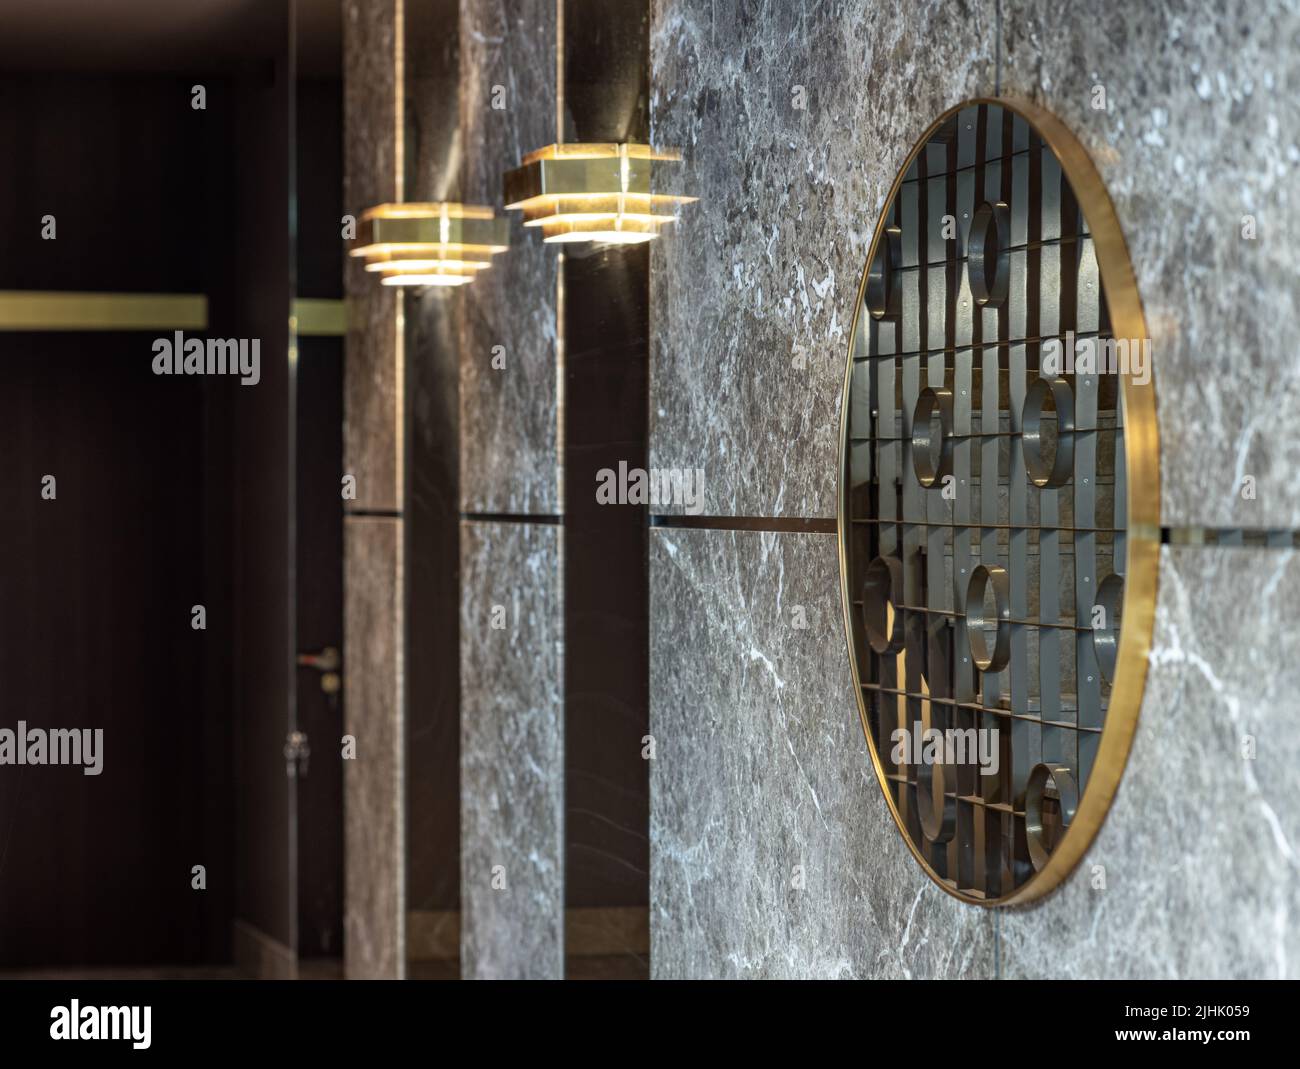 Reflection of stairs and wrought iron gating in mirror on marble wall. Modern interior of entrance in luxury residential apartment building. Stock Photo